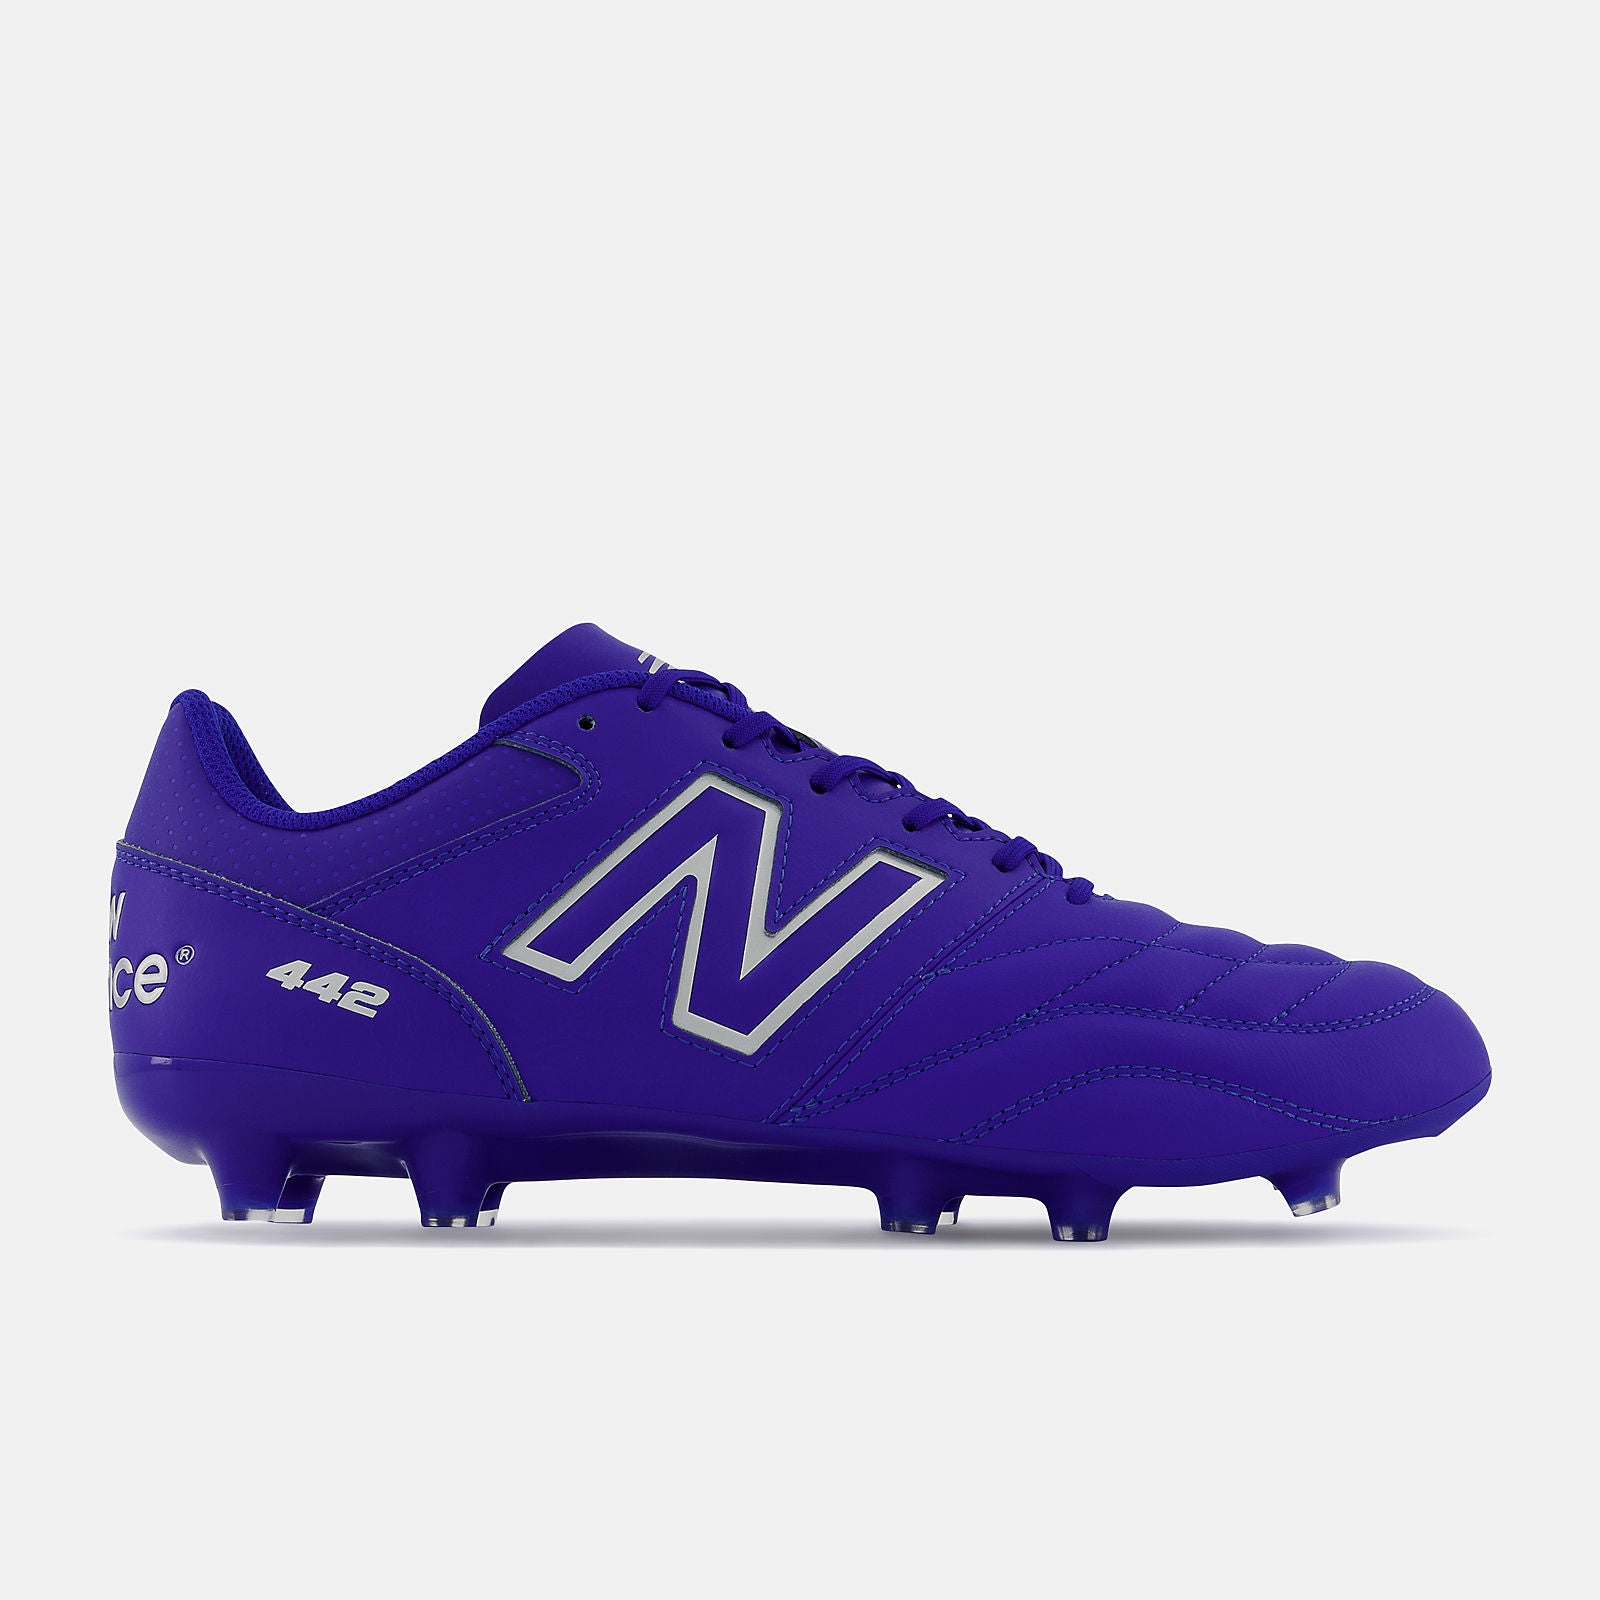 New Balance 442 Team Firmground Soccer Cleats - Royal Blue